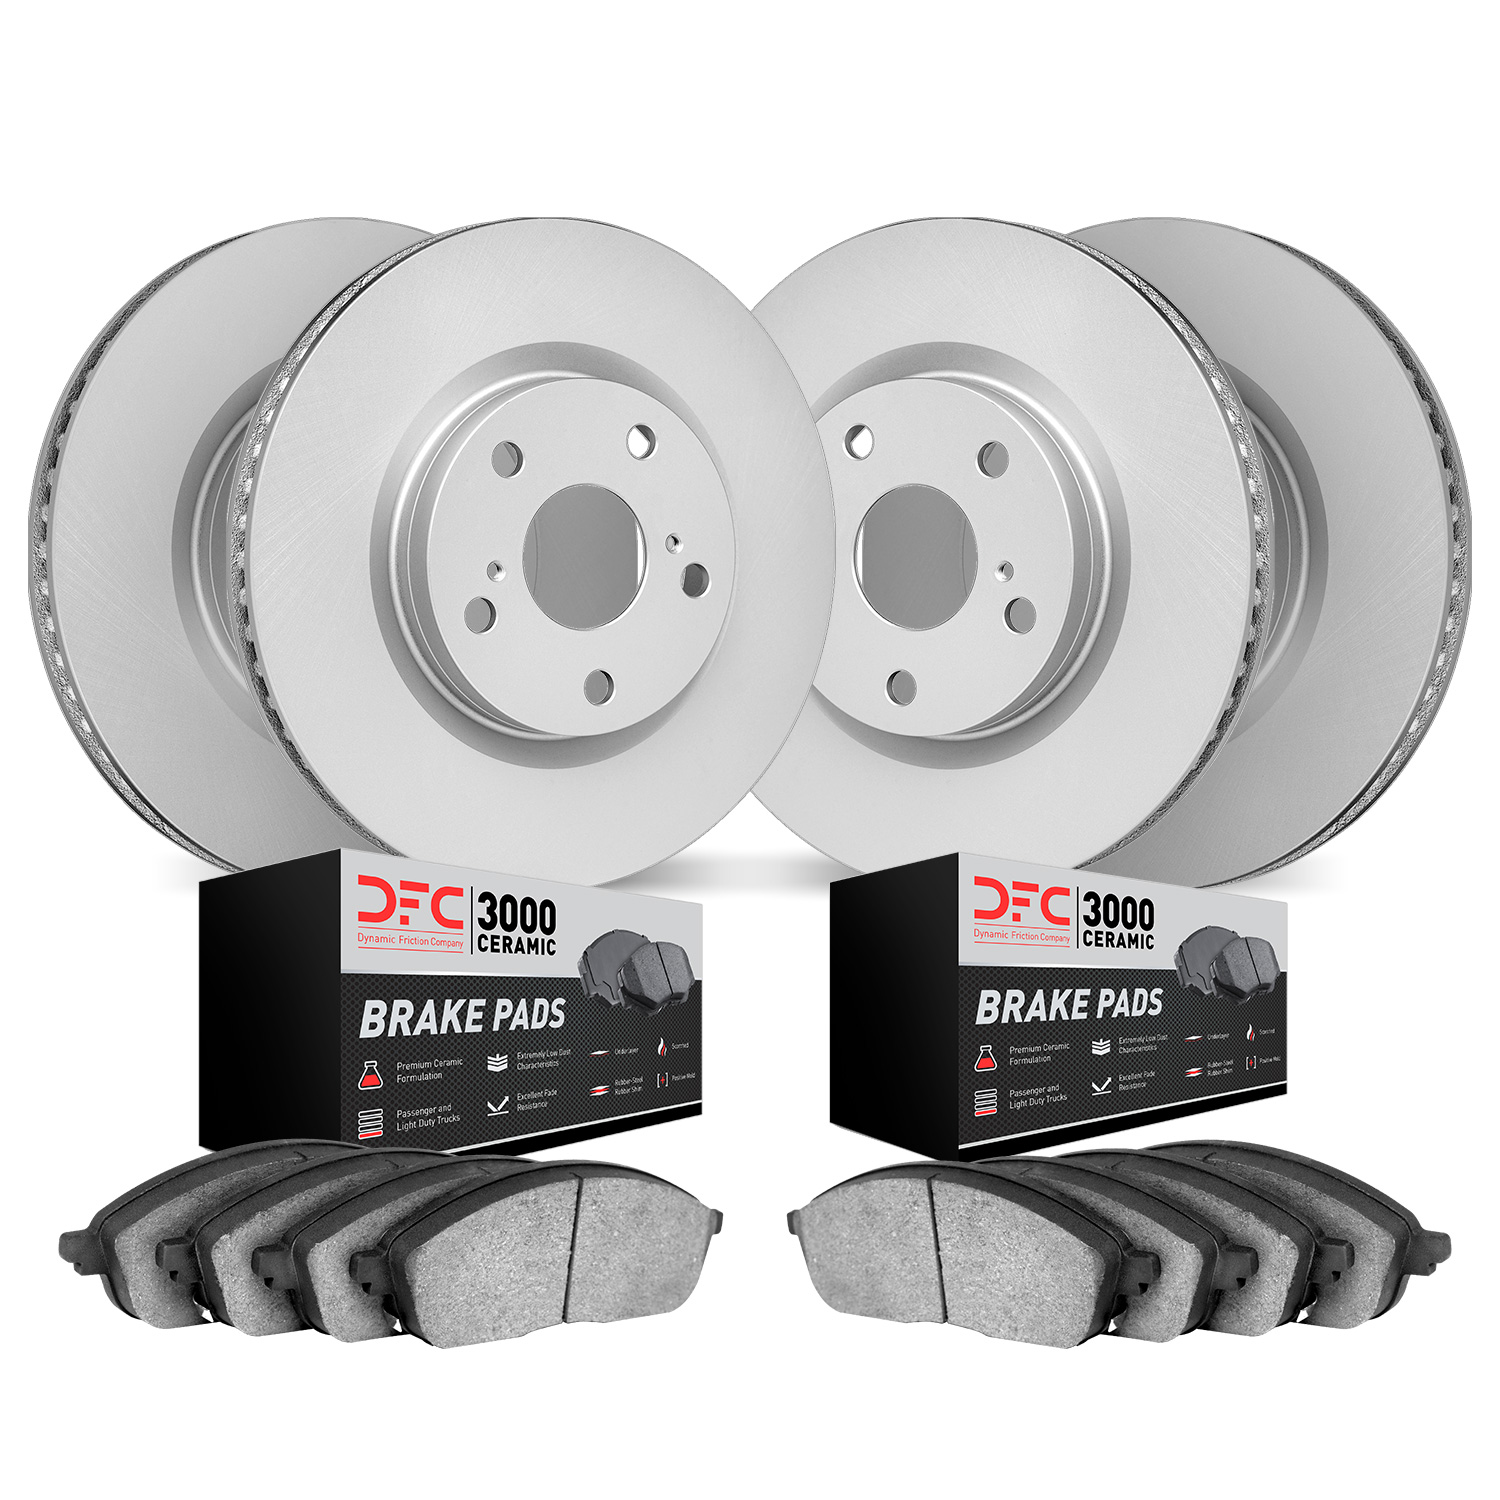 4304-31019 Geospec Brake Rotors with 3000-Series Ceramic Brake Pads Kit, 1997-2000 BMW, Position: Front and Rear